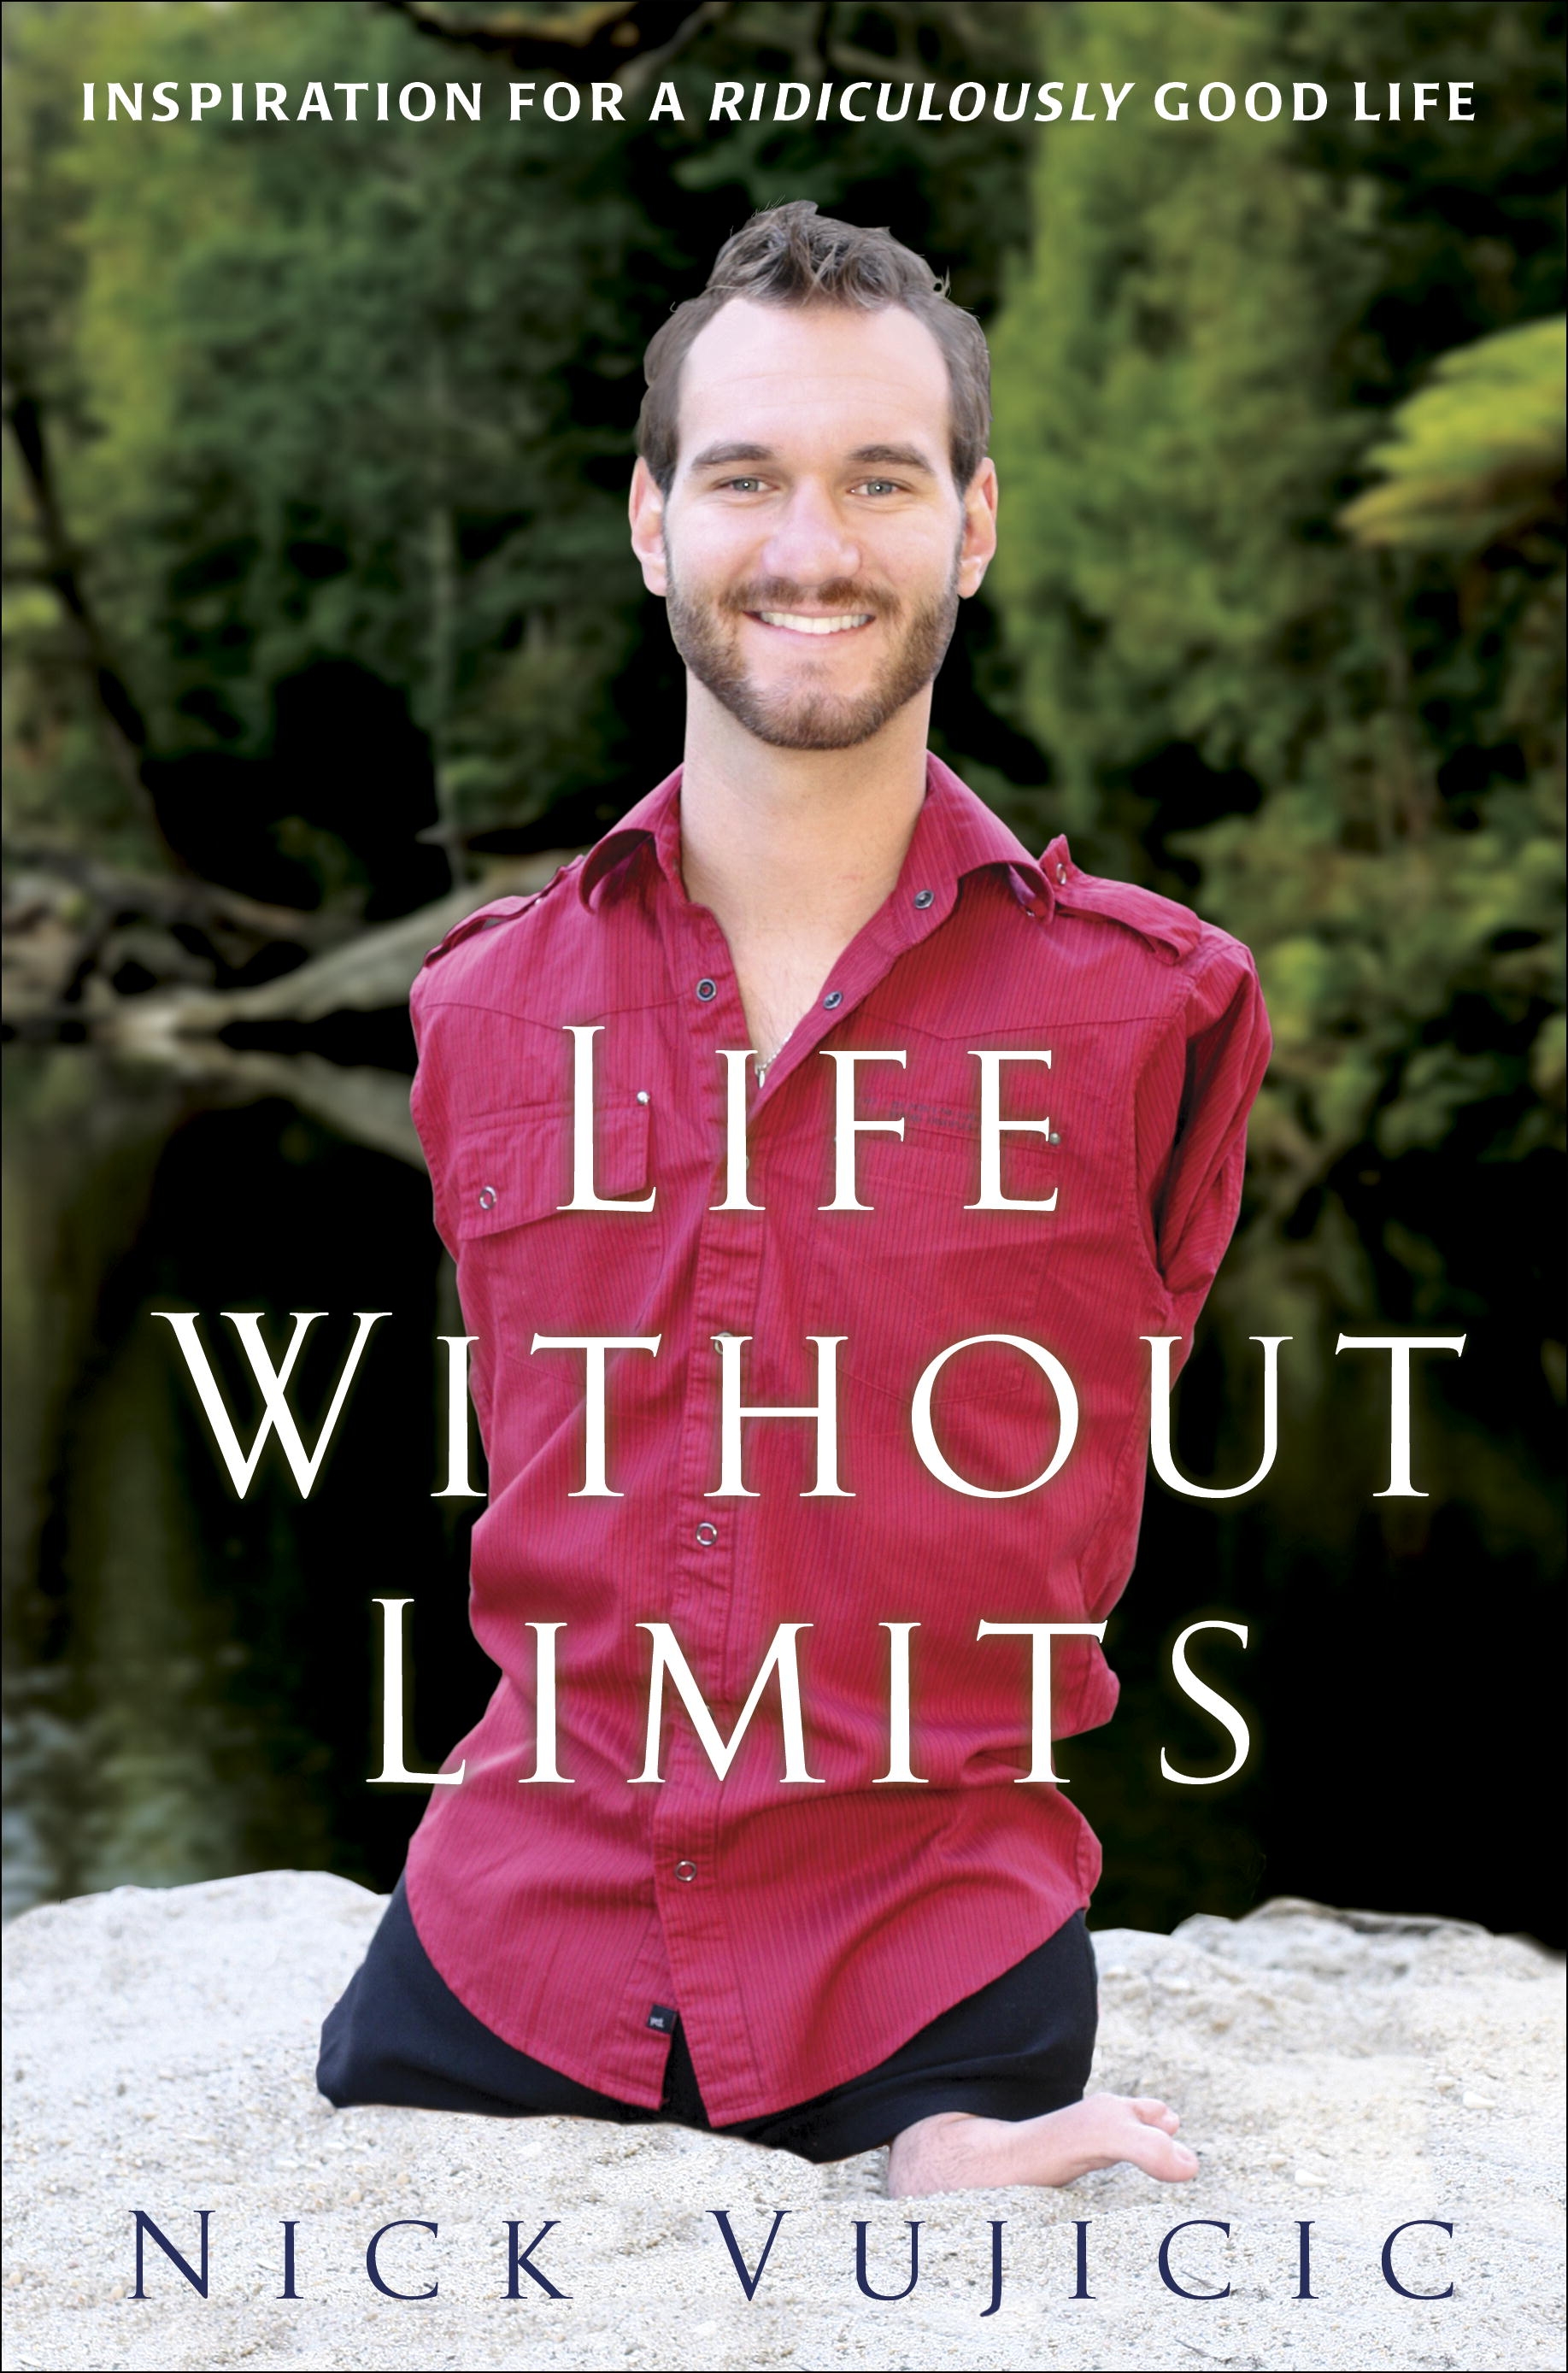 Book Review: Life Without Limits – a writer's inkhorn